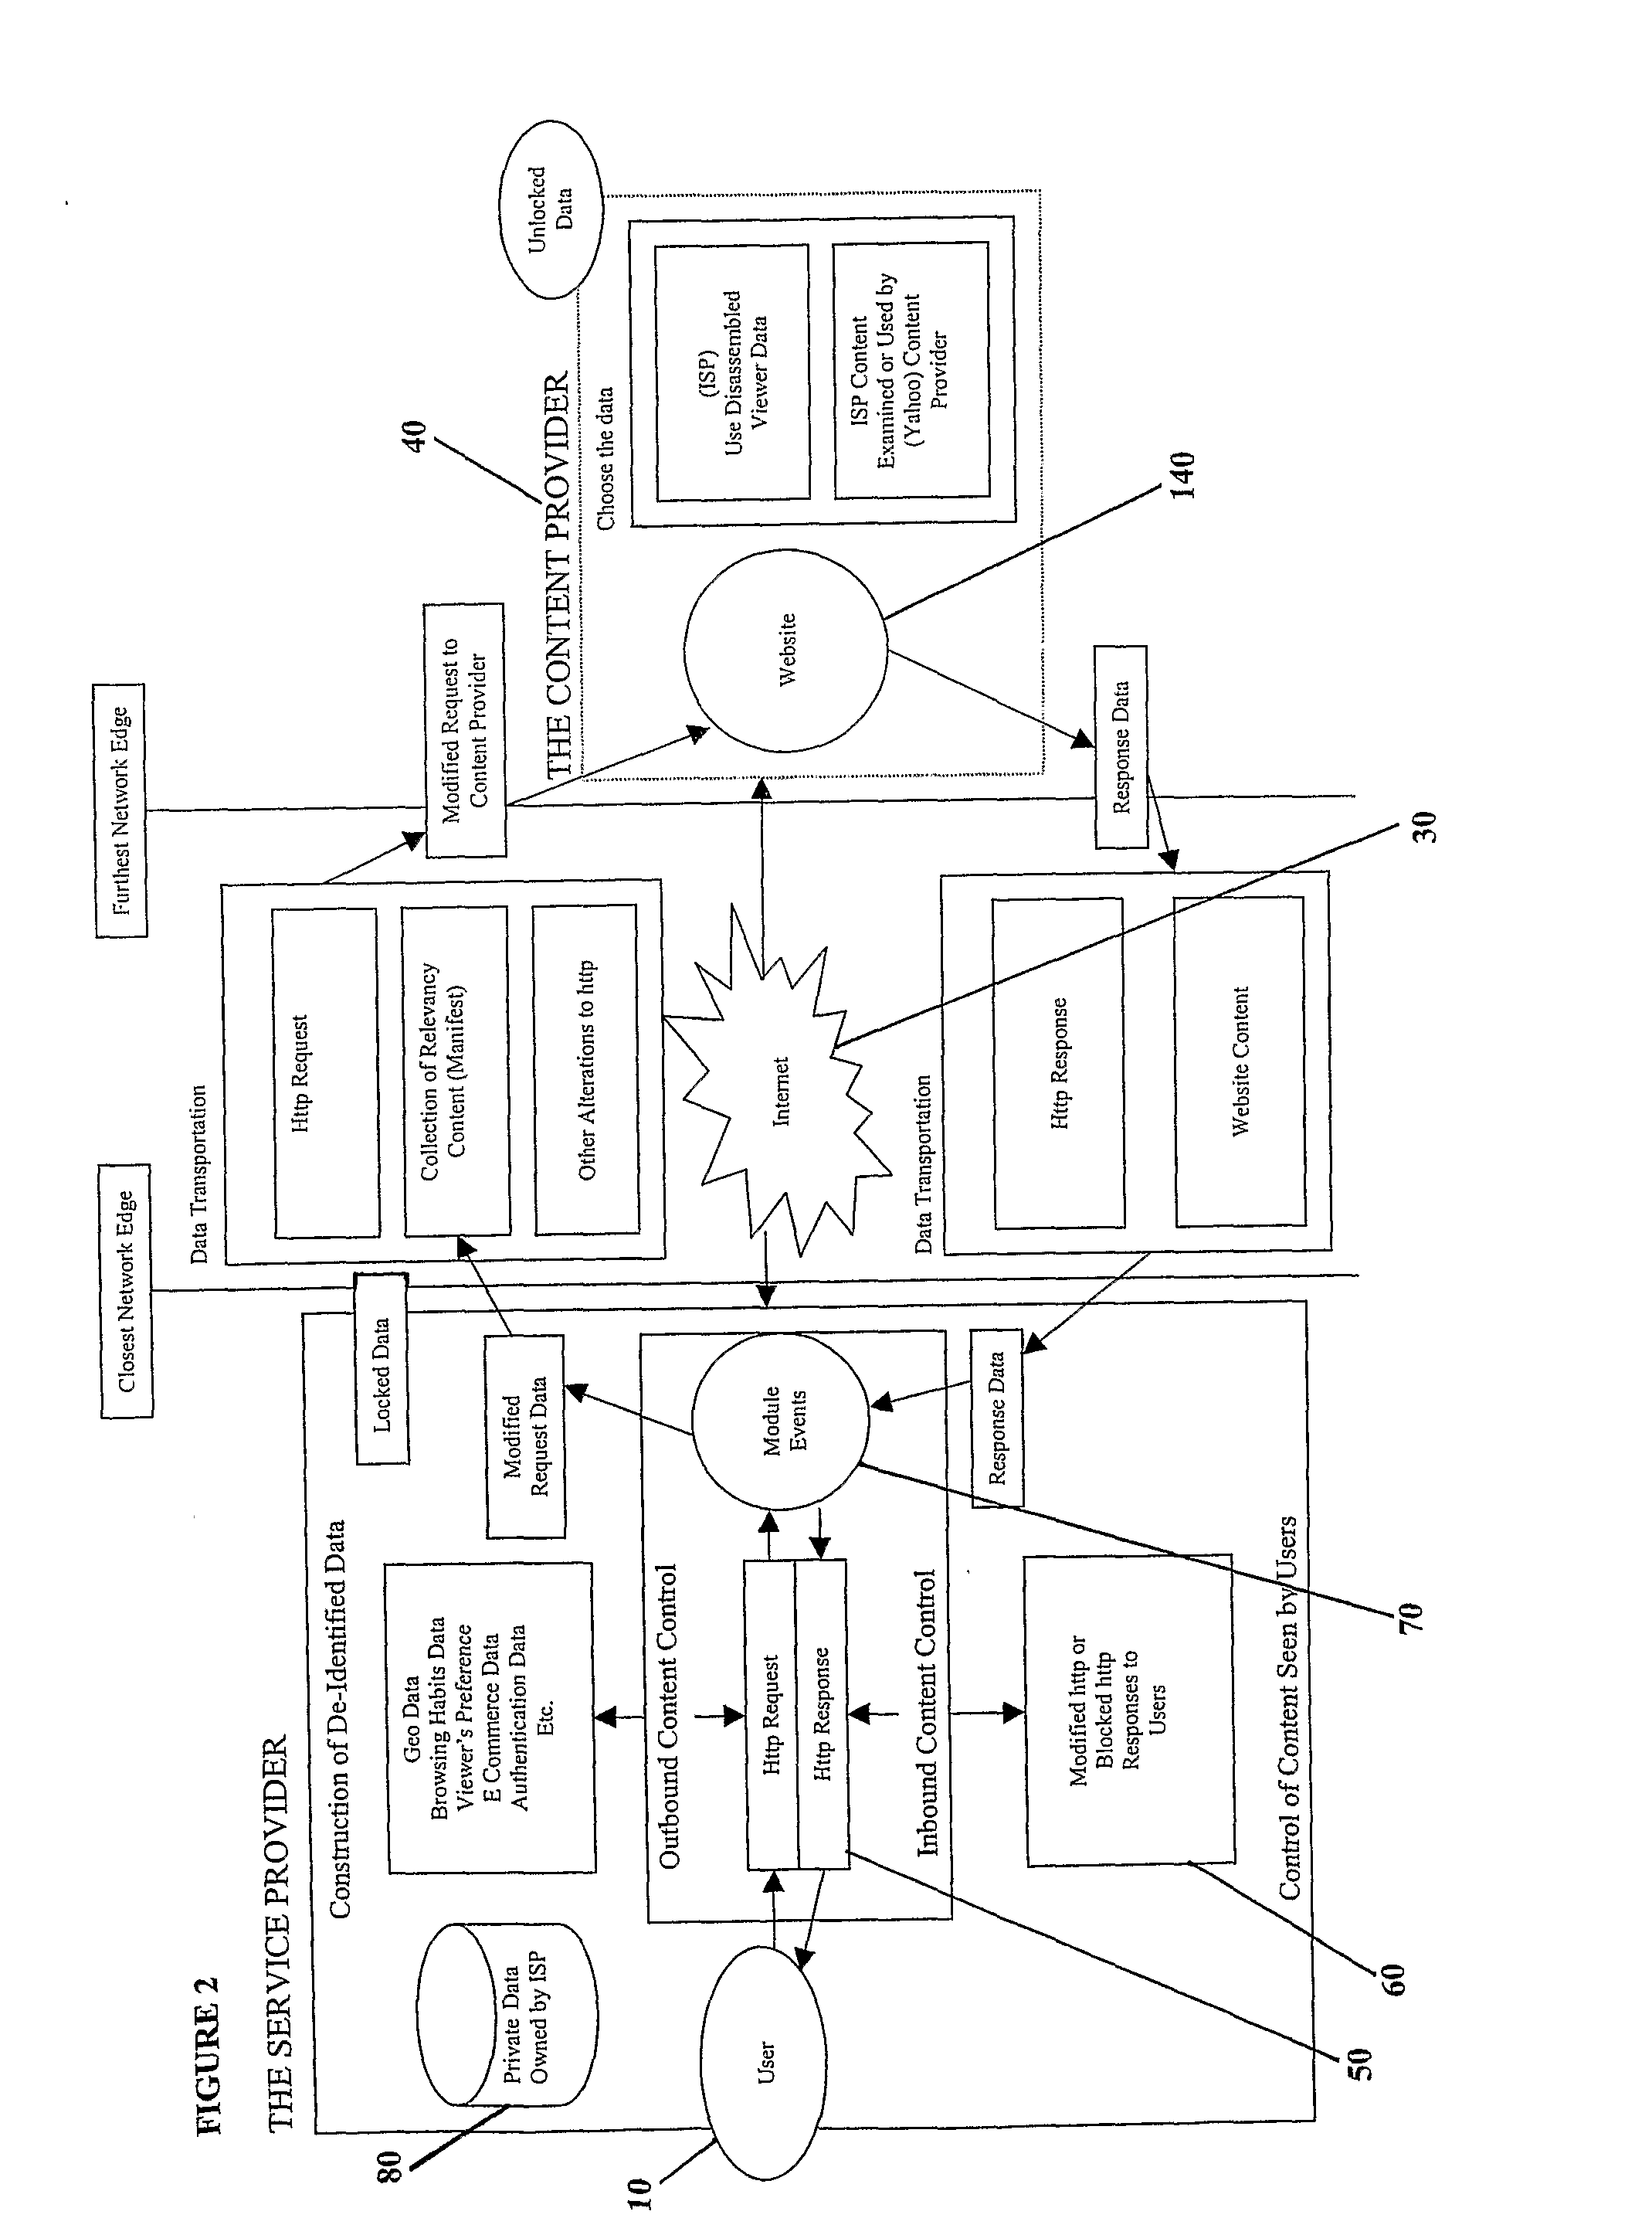 Method and System of Targeting Content